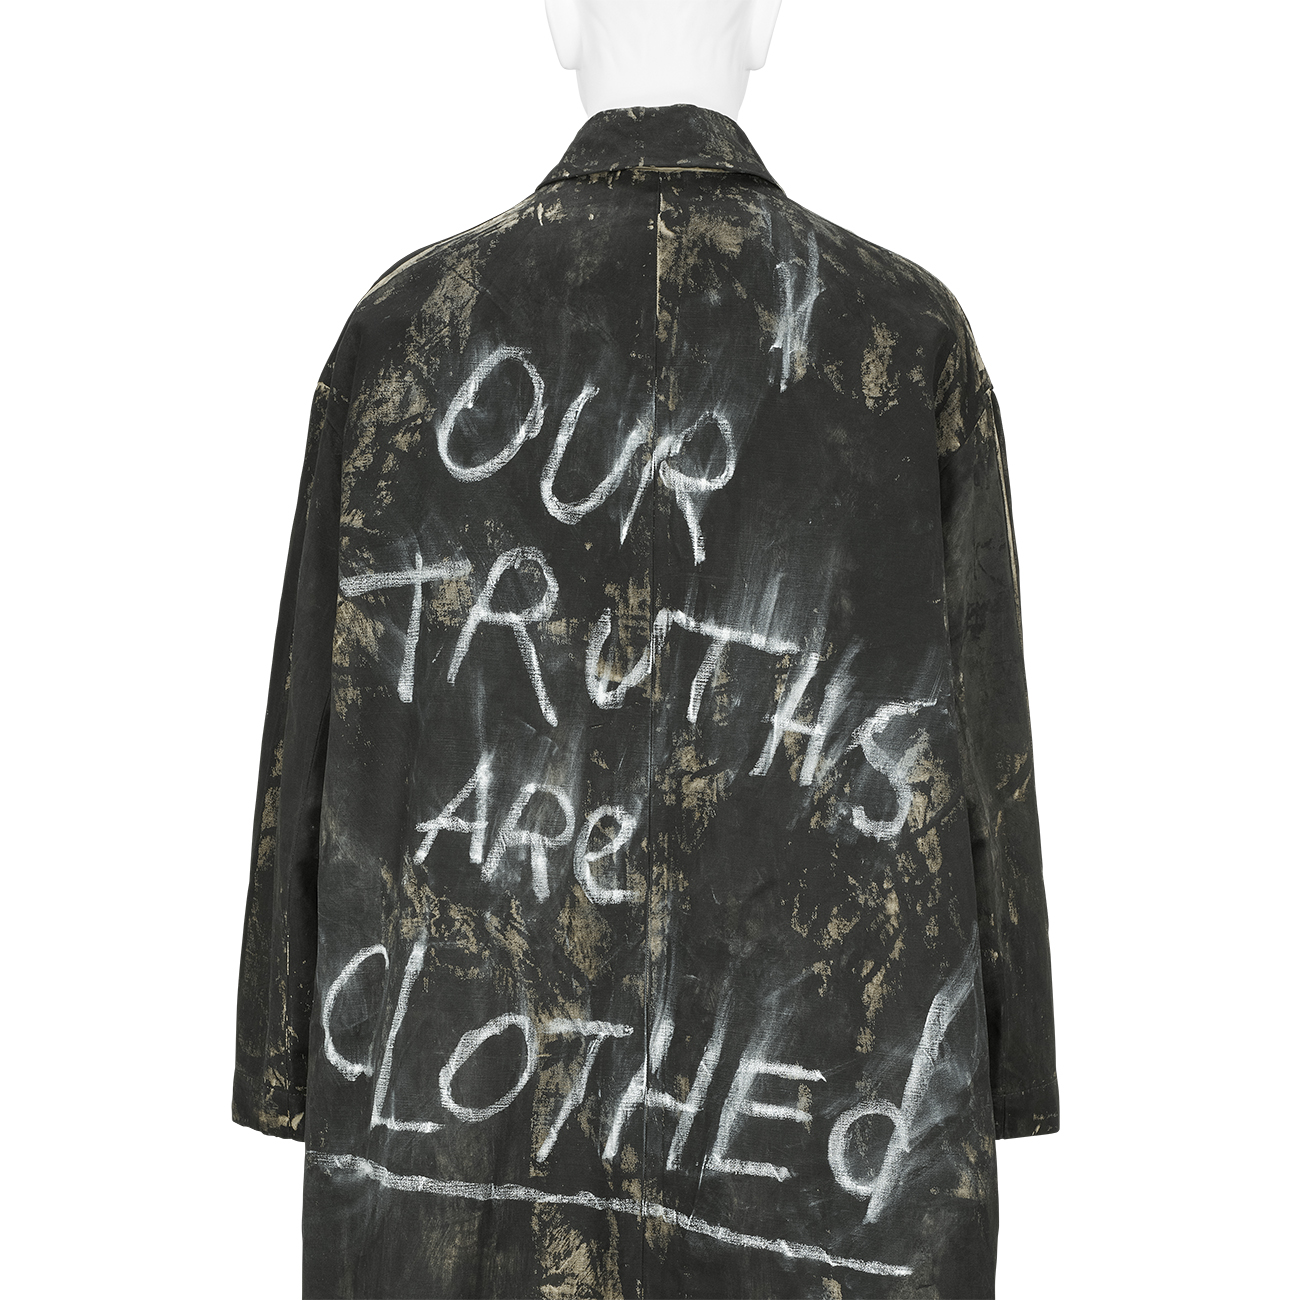 TIGRAN AVETISYAN×ELIMINATOR (ティグラン アヴェティスヤン×エリミネイター) - OUR TRUTHS ARE CLOTHED COAT BEIGE×BLACKの詳細画像5